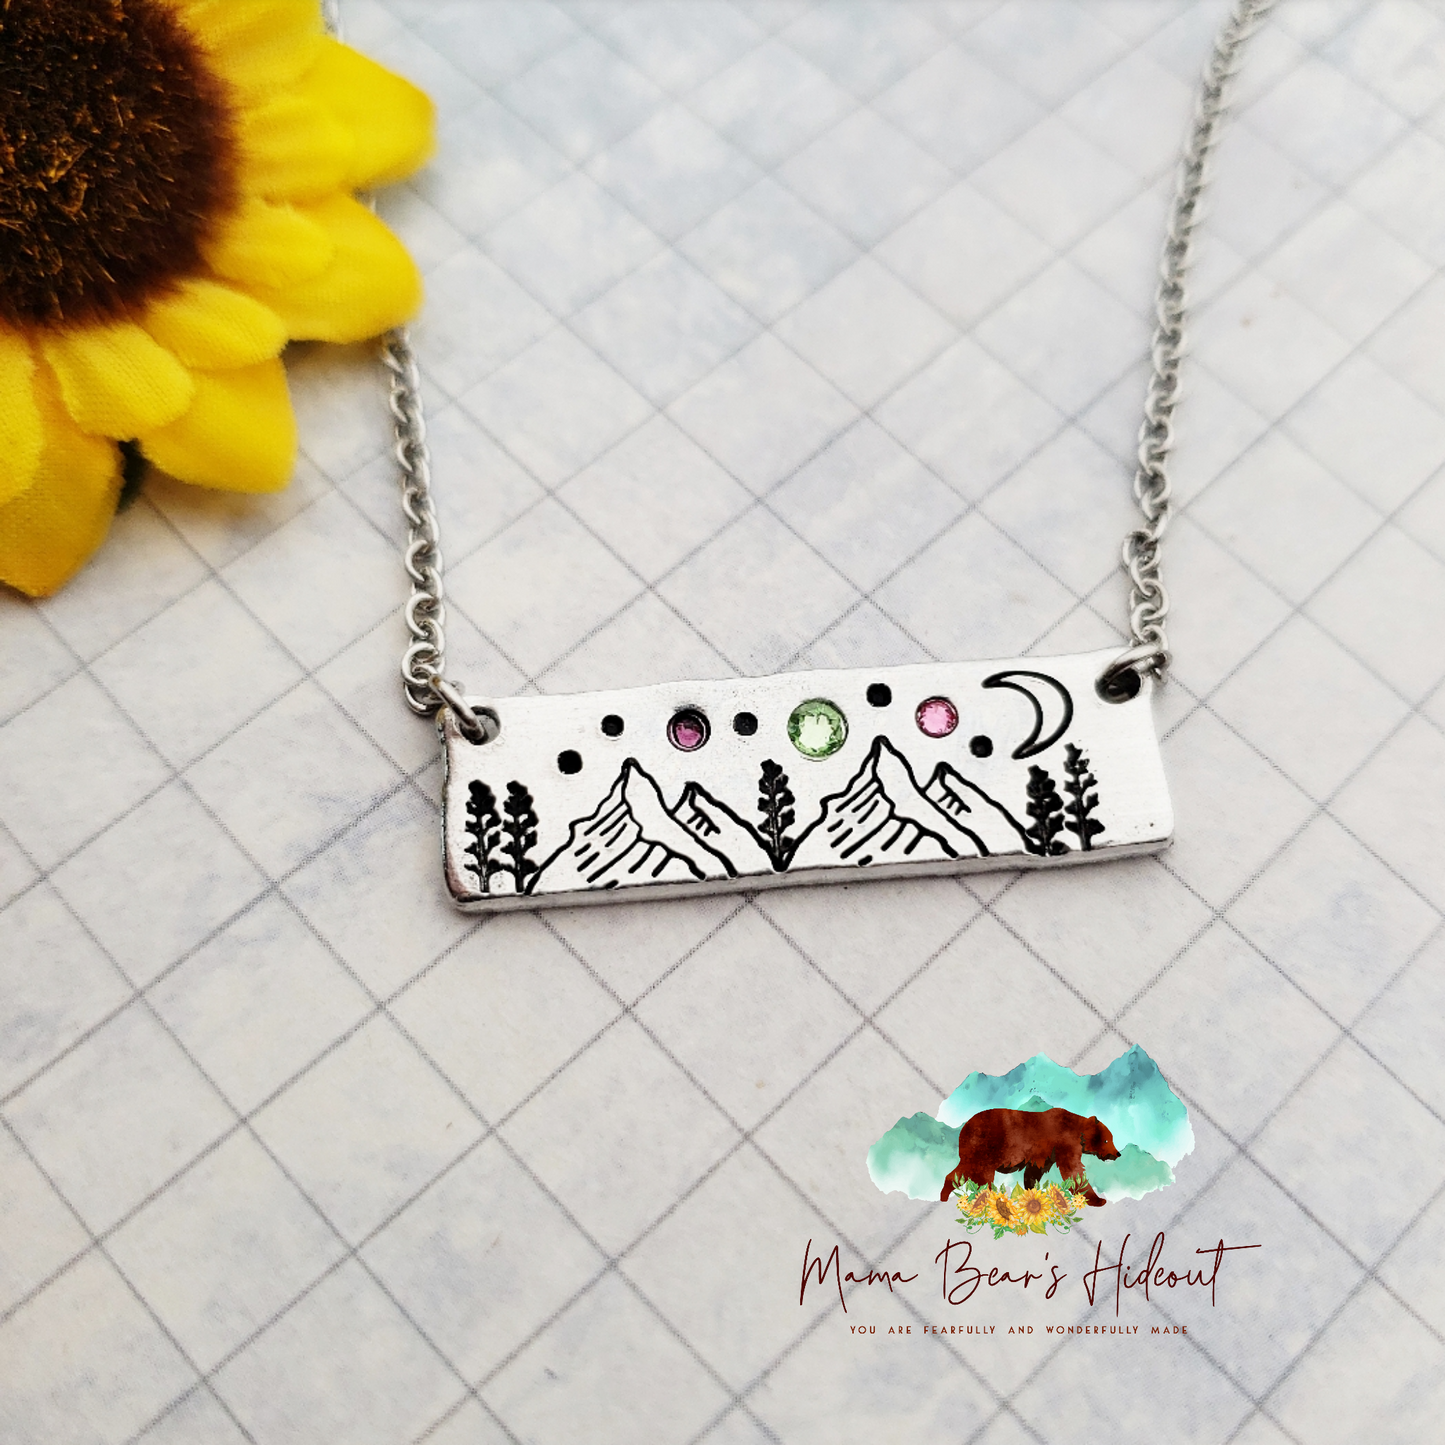 The Under The Stars Necklace: New Length